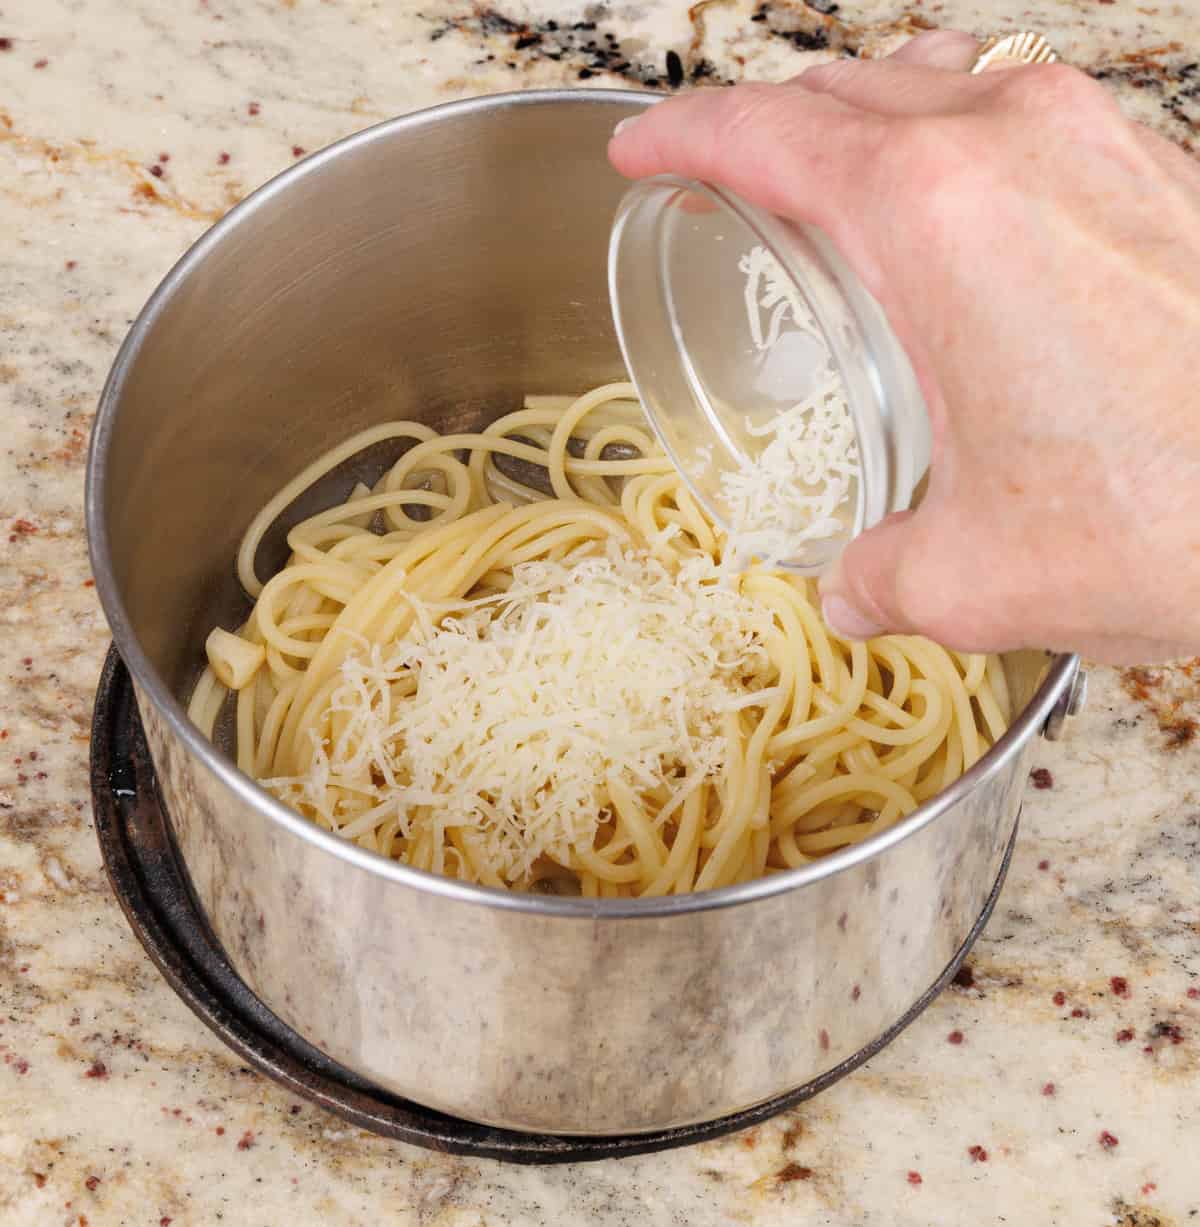 adding parmesan cheese to a bowl of pasta.